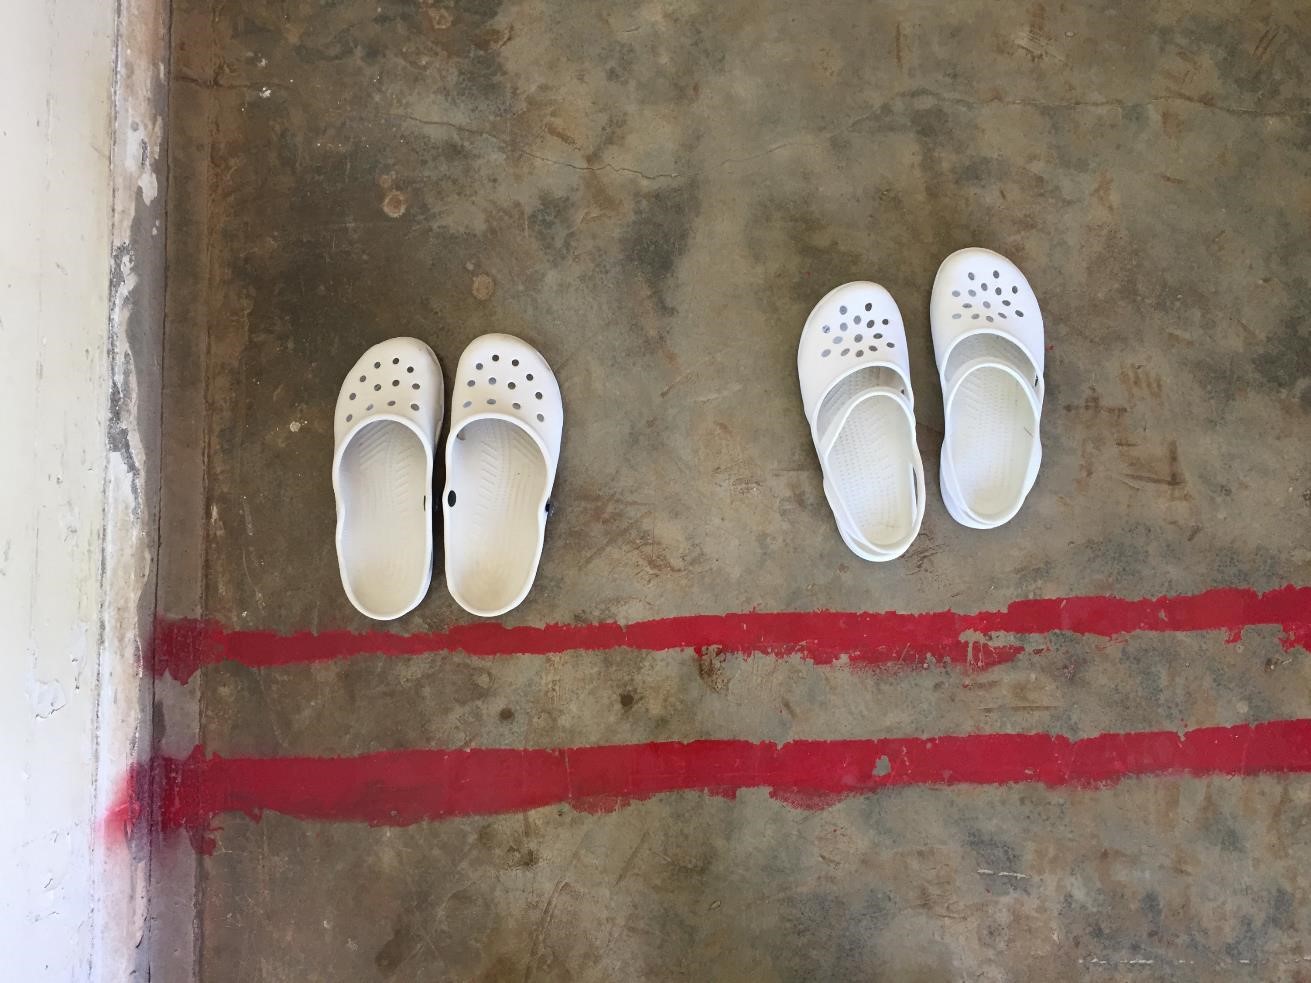 Two pairs of white shoes on the floor behind a double line of red paint